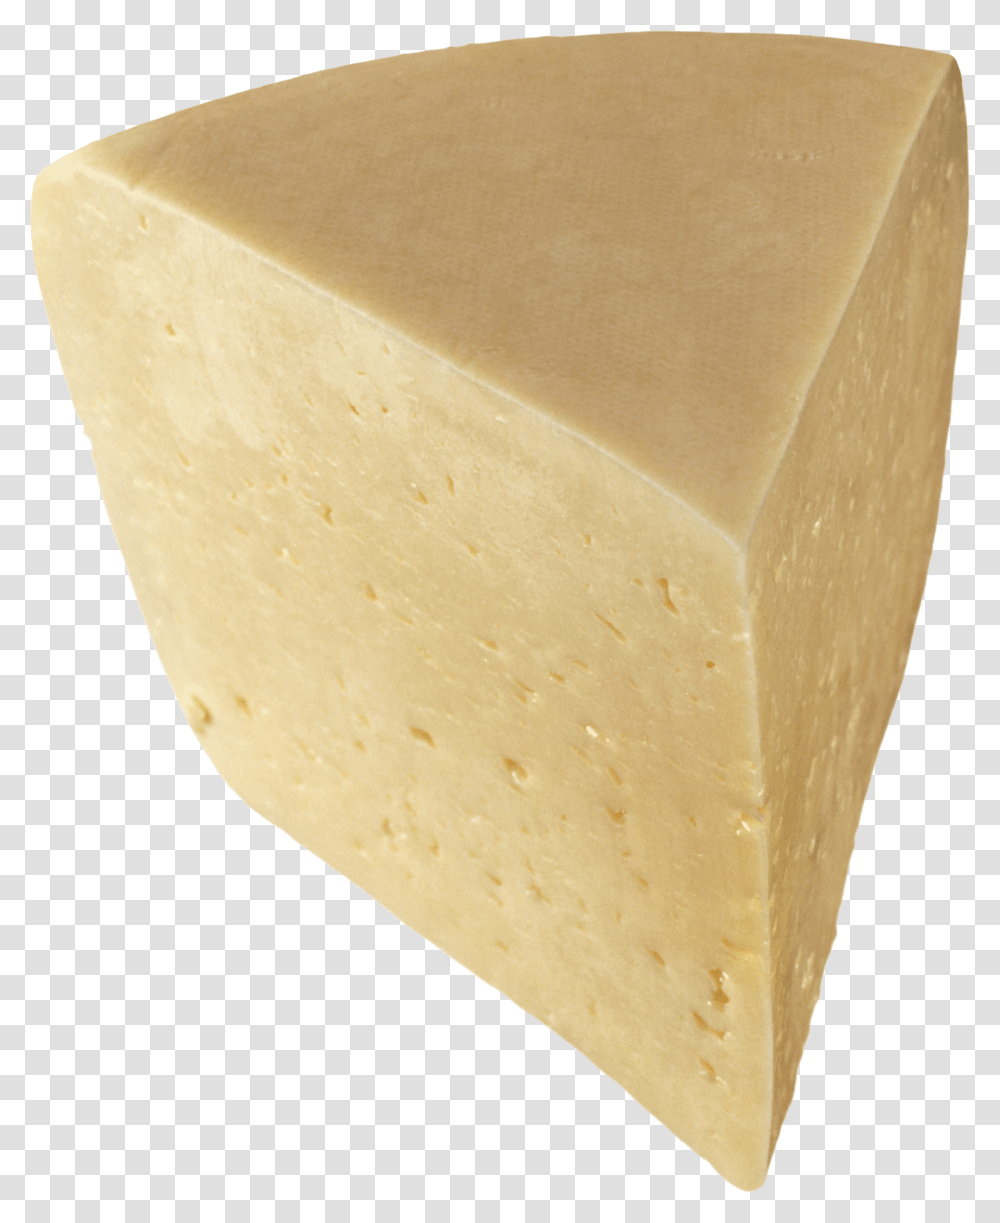 Cheese With No Background Image Parmesan Cheese Background Transparent Png